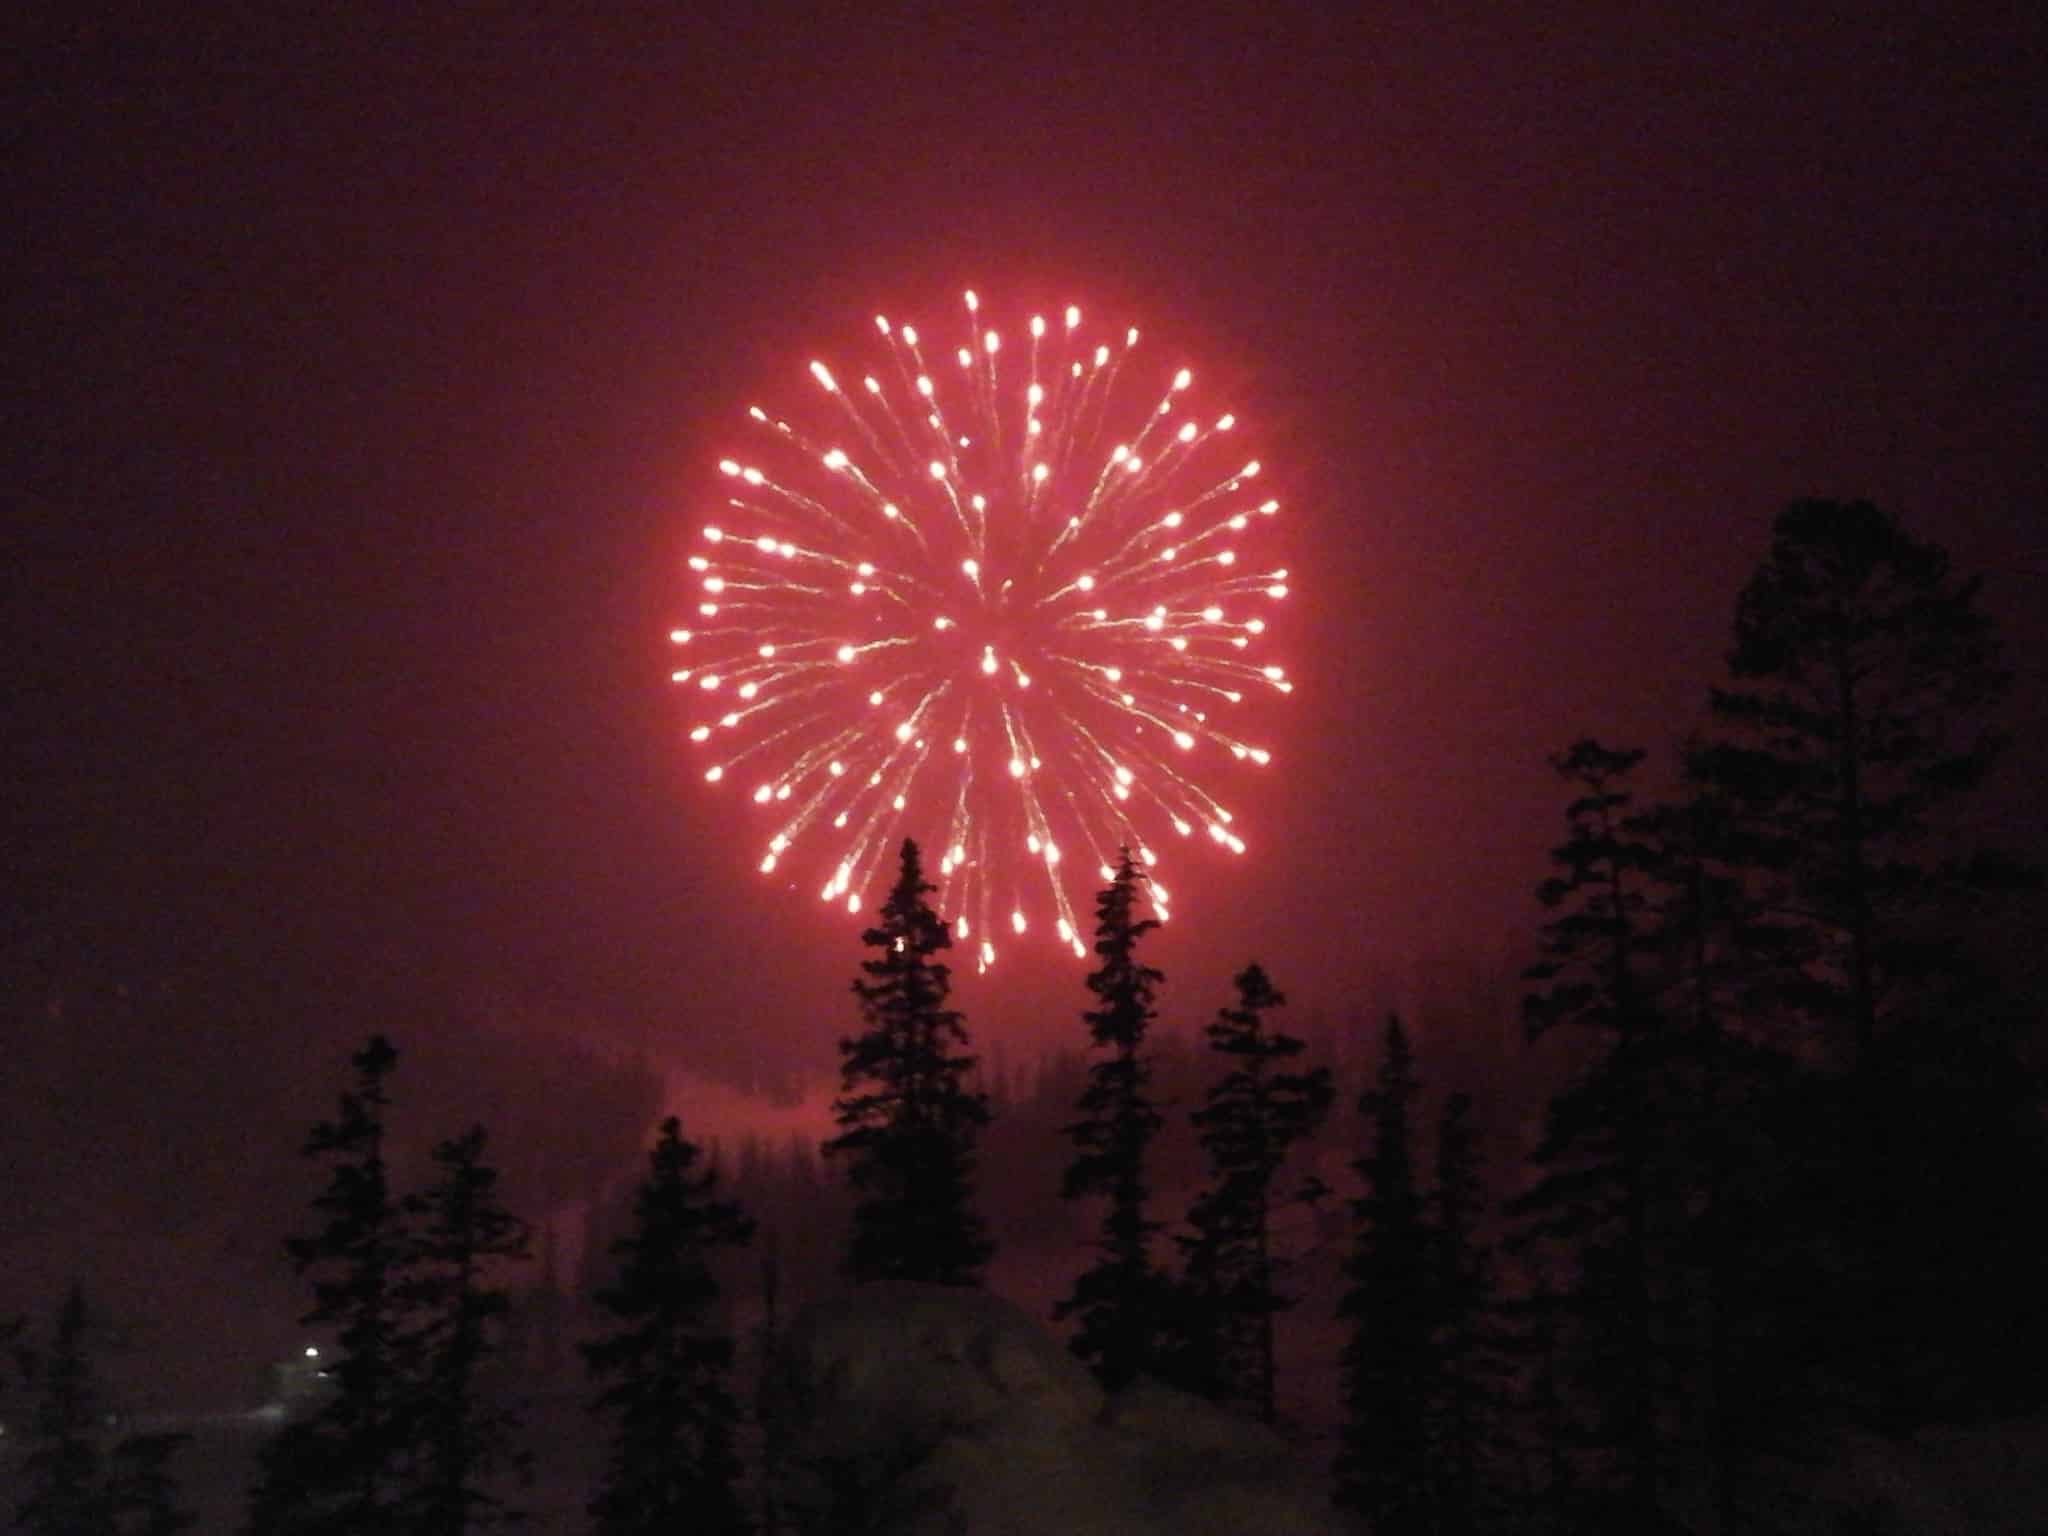 Evening winter scene with a huge red firework shinning in the night at ski area.